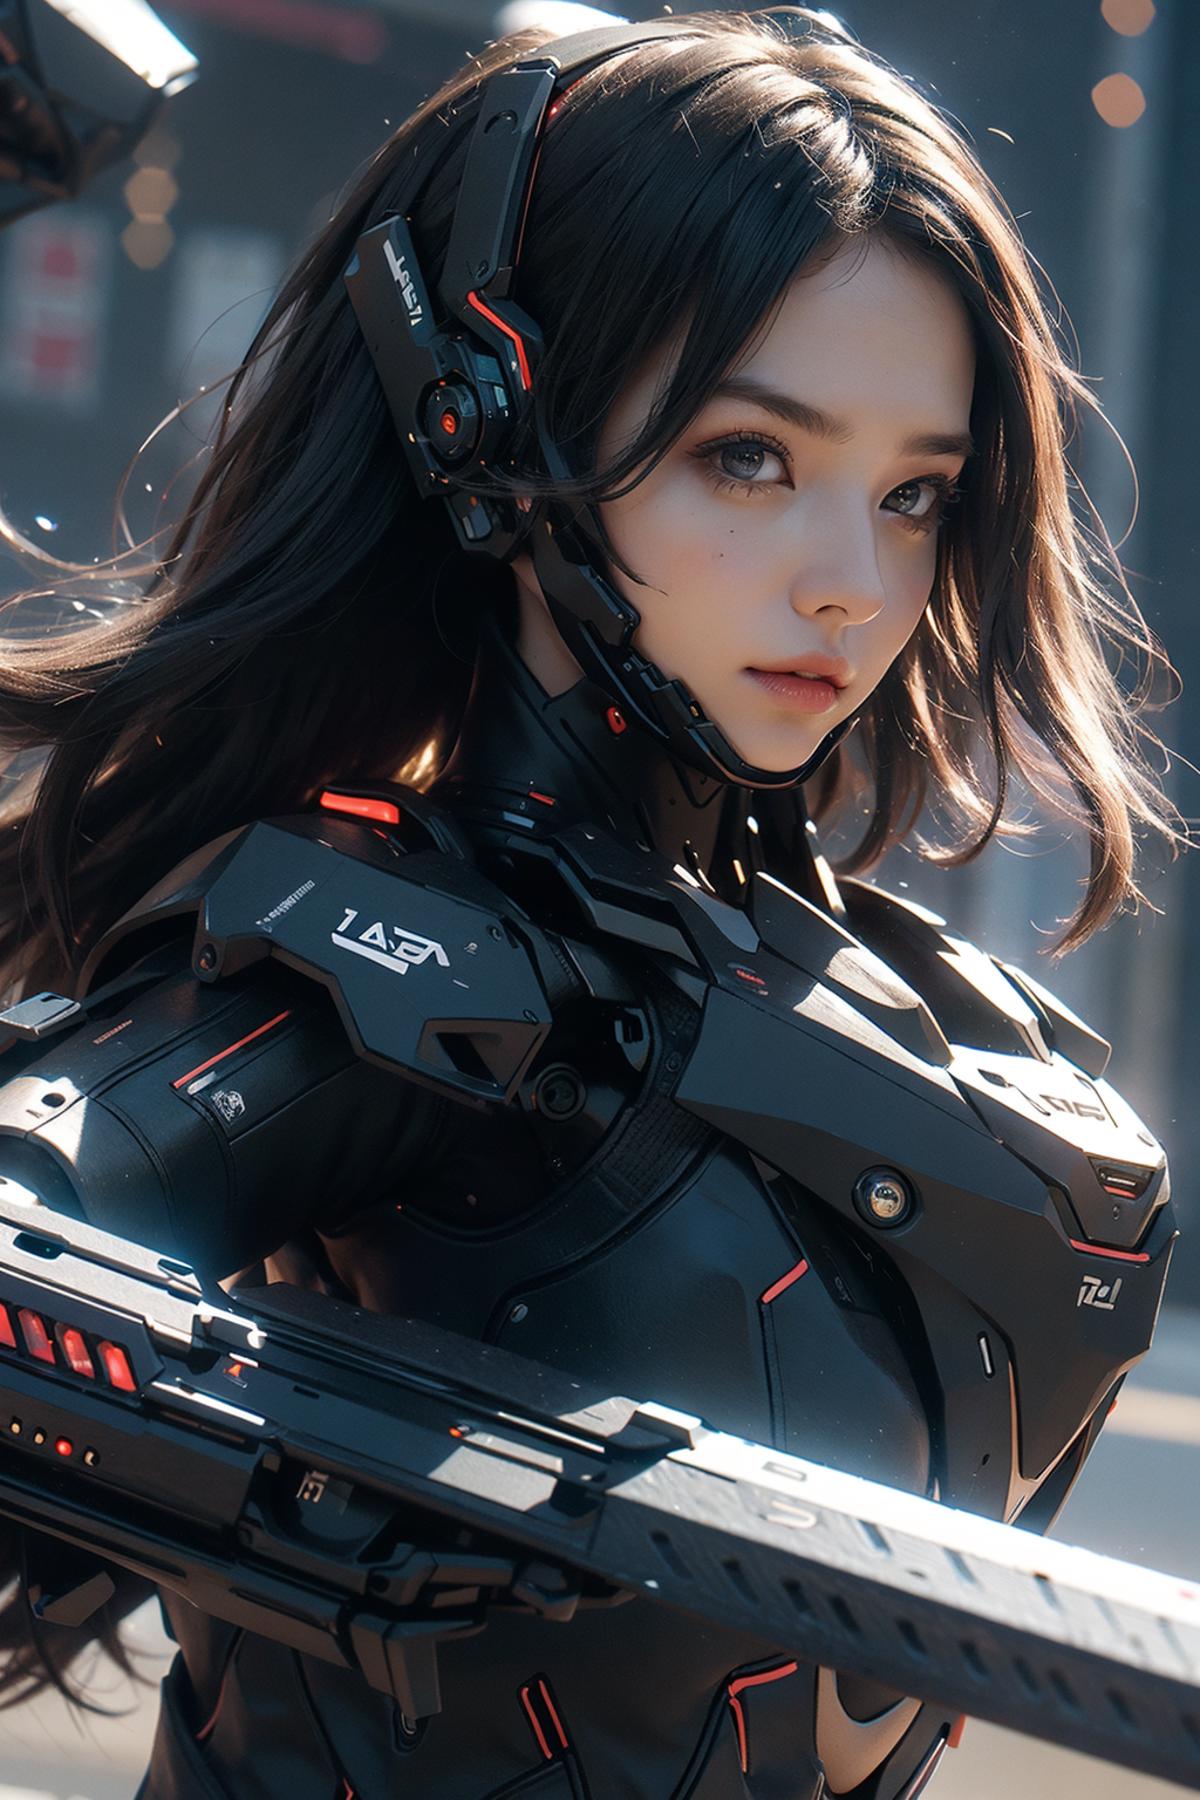 Anime-style woman wearing futuristic armor and holding a weapon.